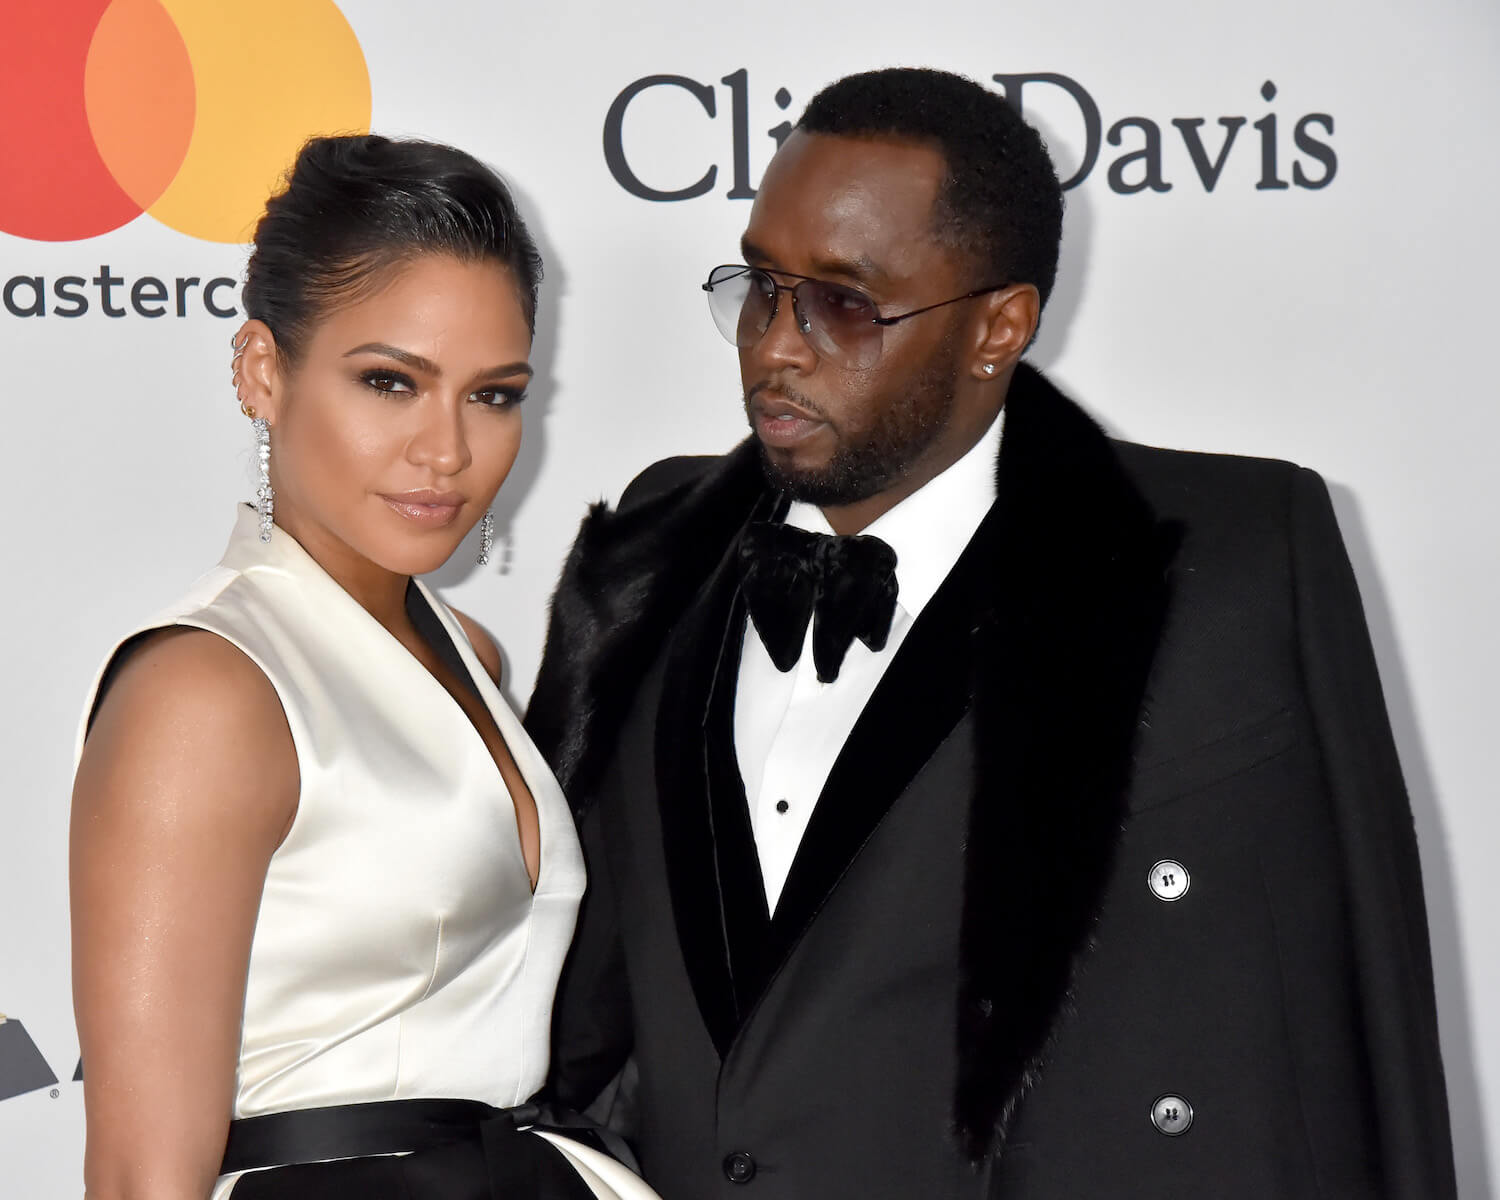 Casandra 'Cassie' Ventura standing next to Sean 'P. Diddy' Combs. Cassie is wearing a white and black dress; Combs is wearing a tuxedo.